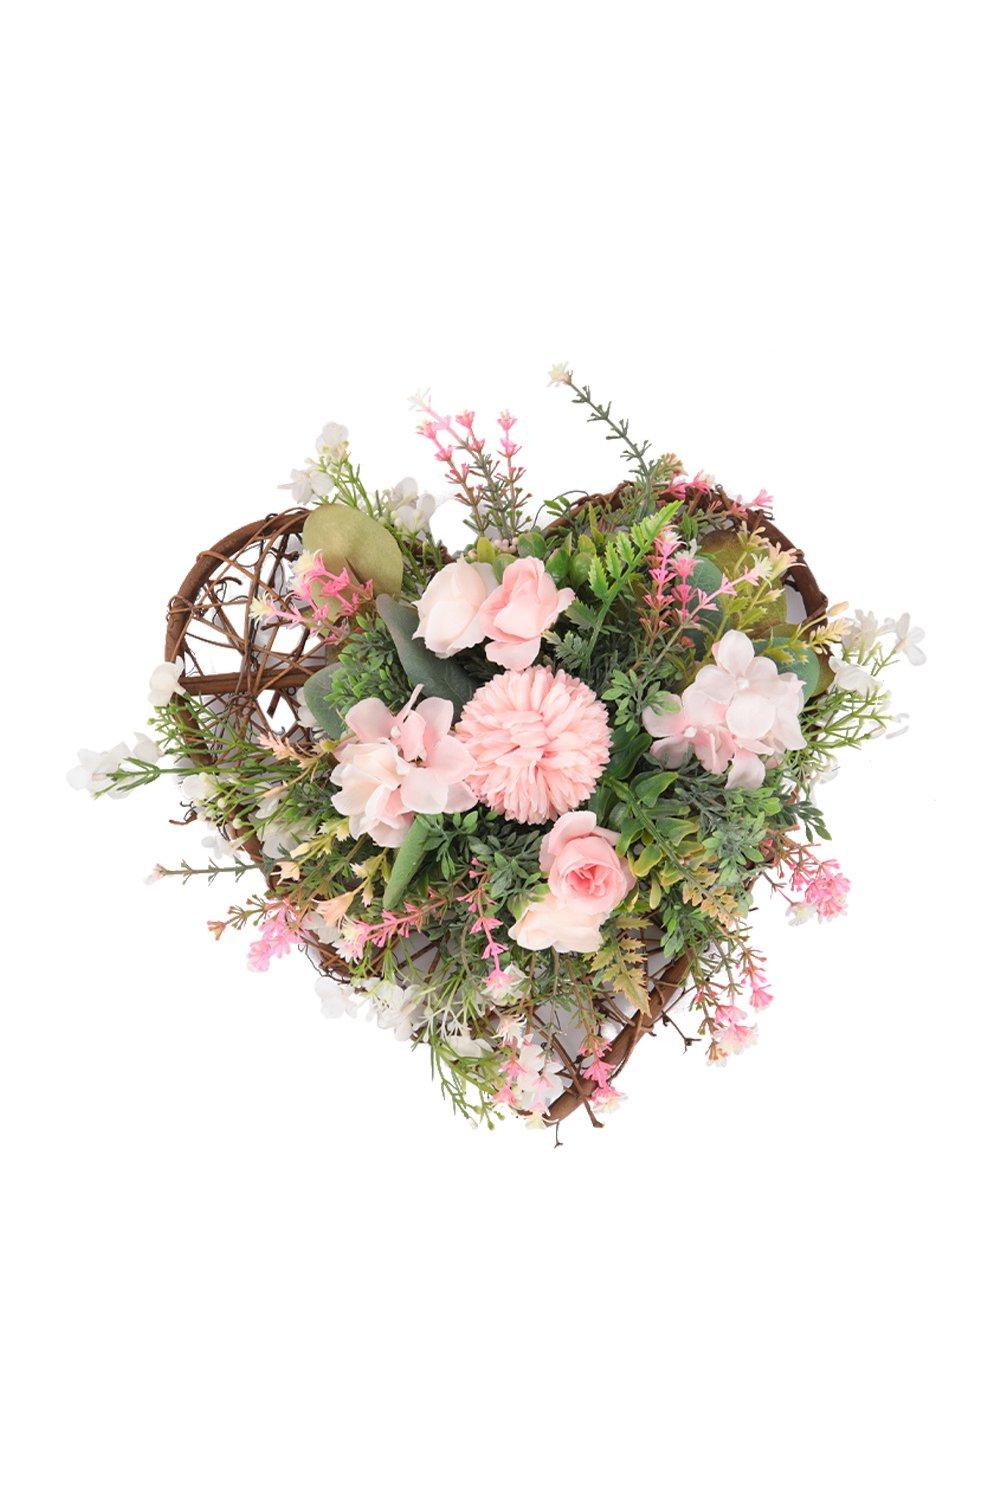 Rustic Assorted Flowers Heart-shaped Wreath Wedding Decoration